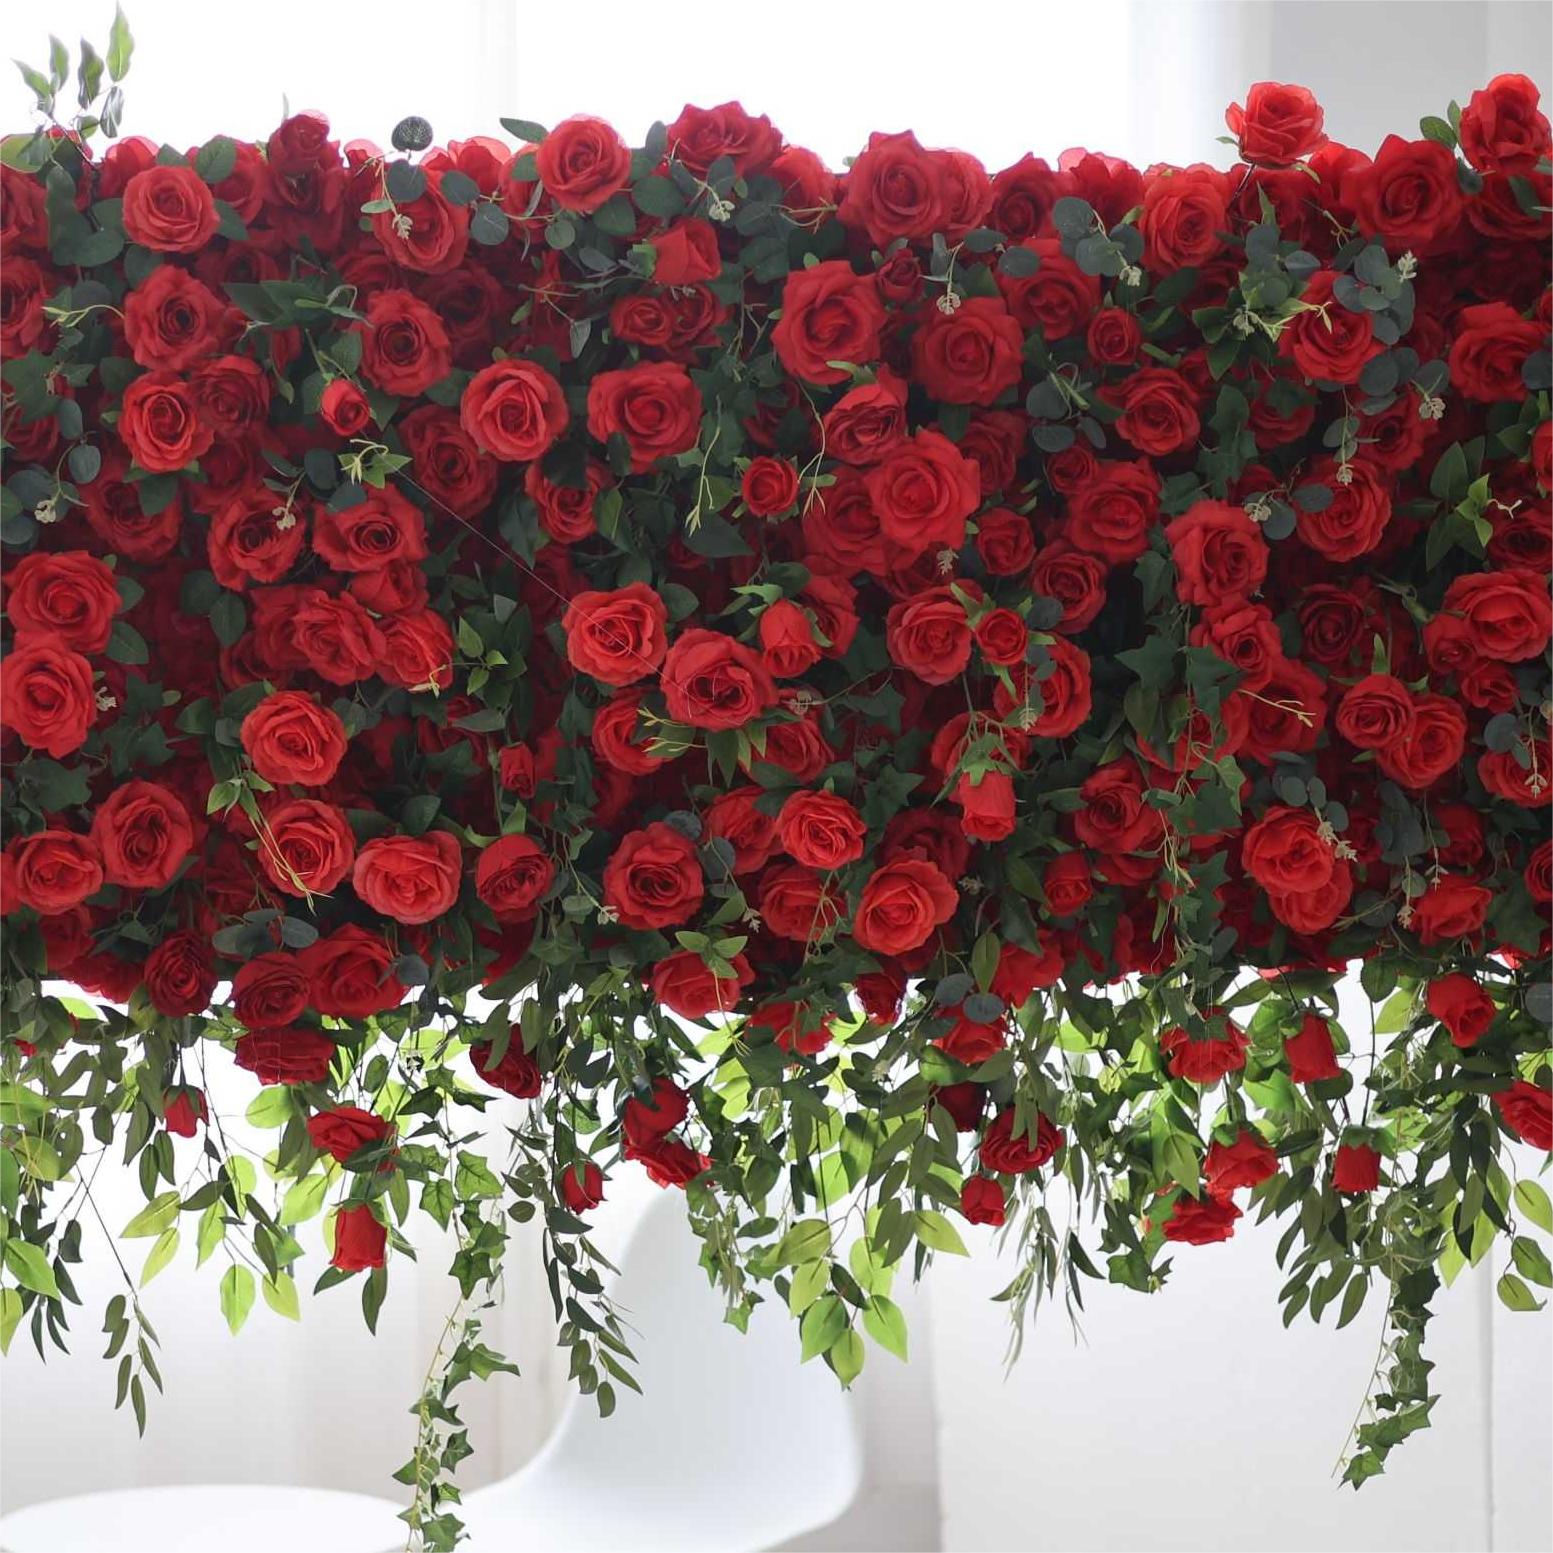 The red rose flower wall looks warm and romantic.